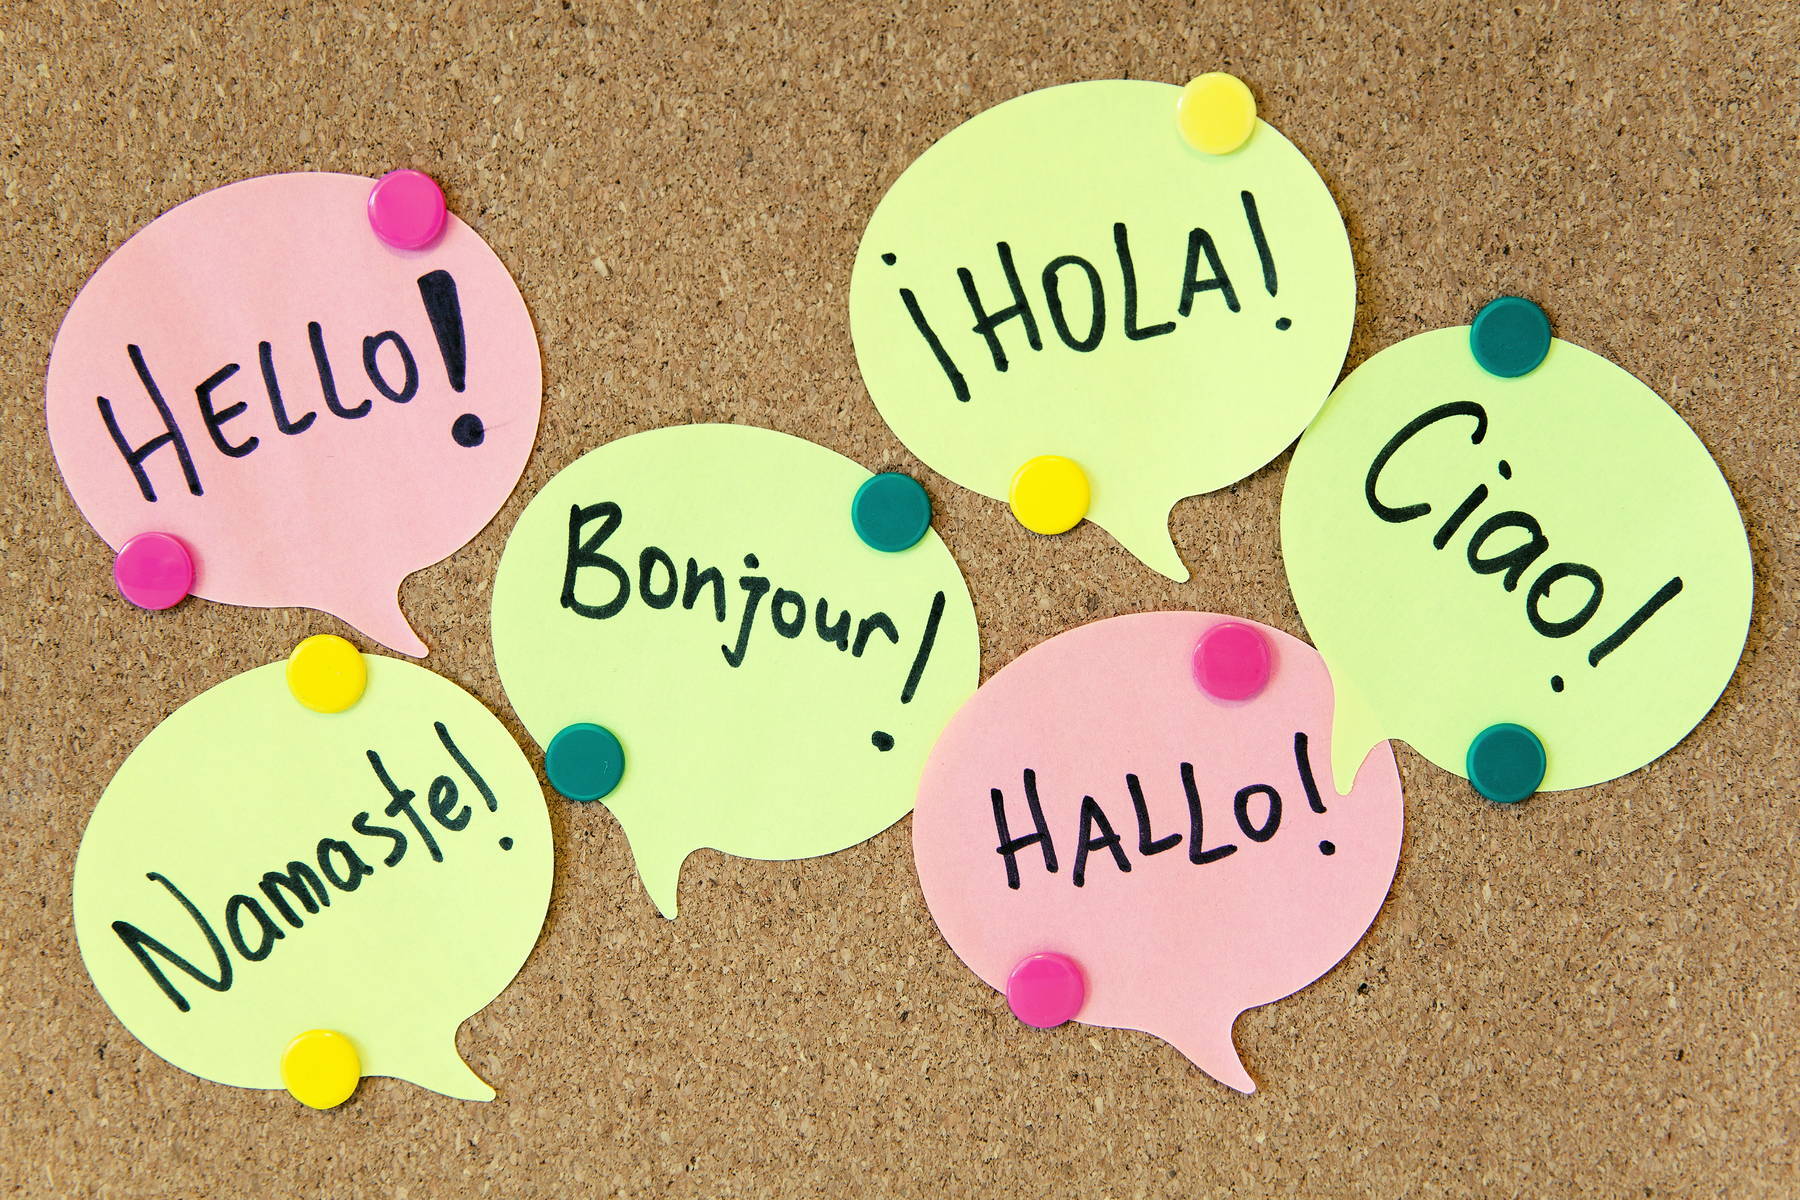 'Hello' in various languages